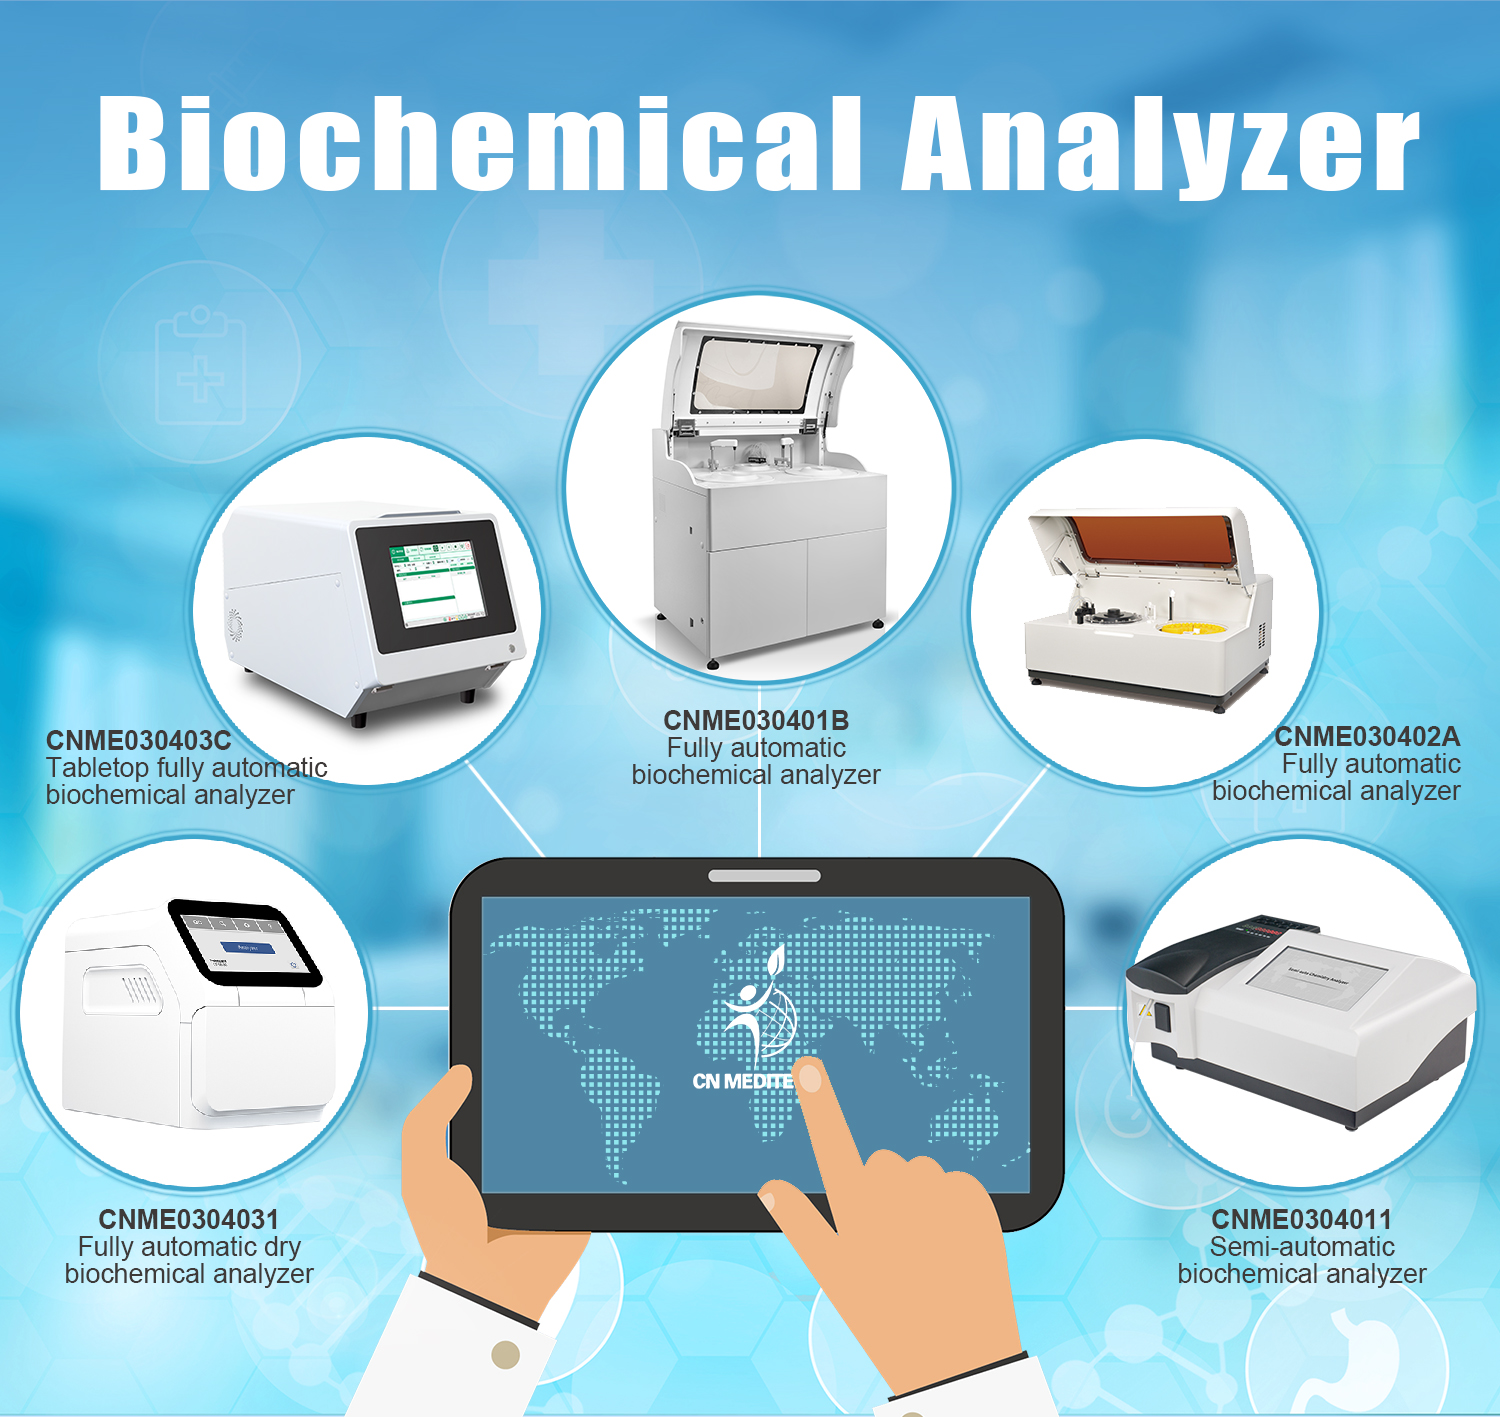 Difference between semi-automatic and fully automatic biochemical analyzer